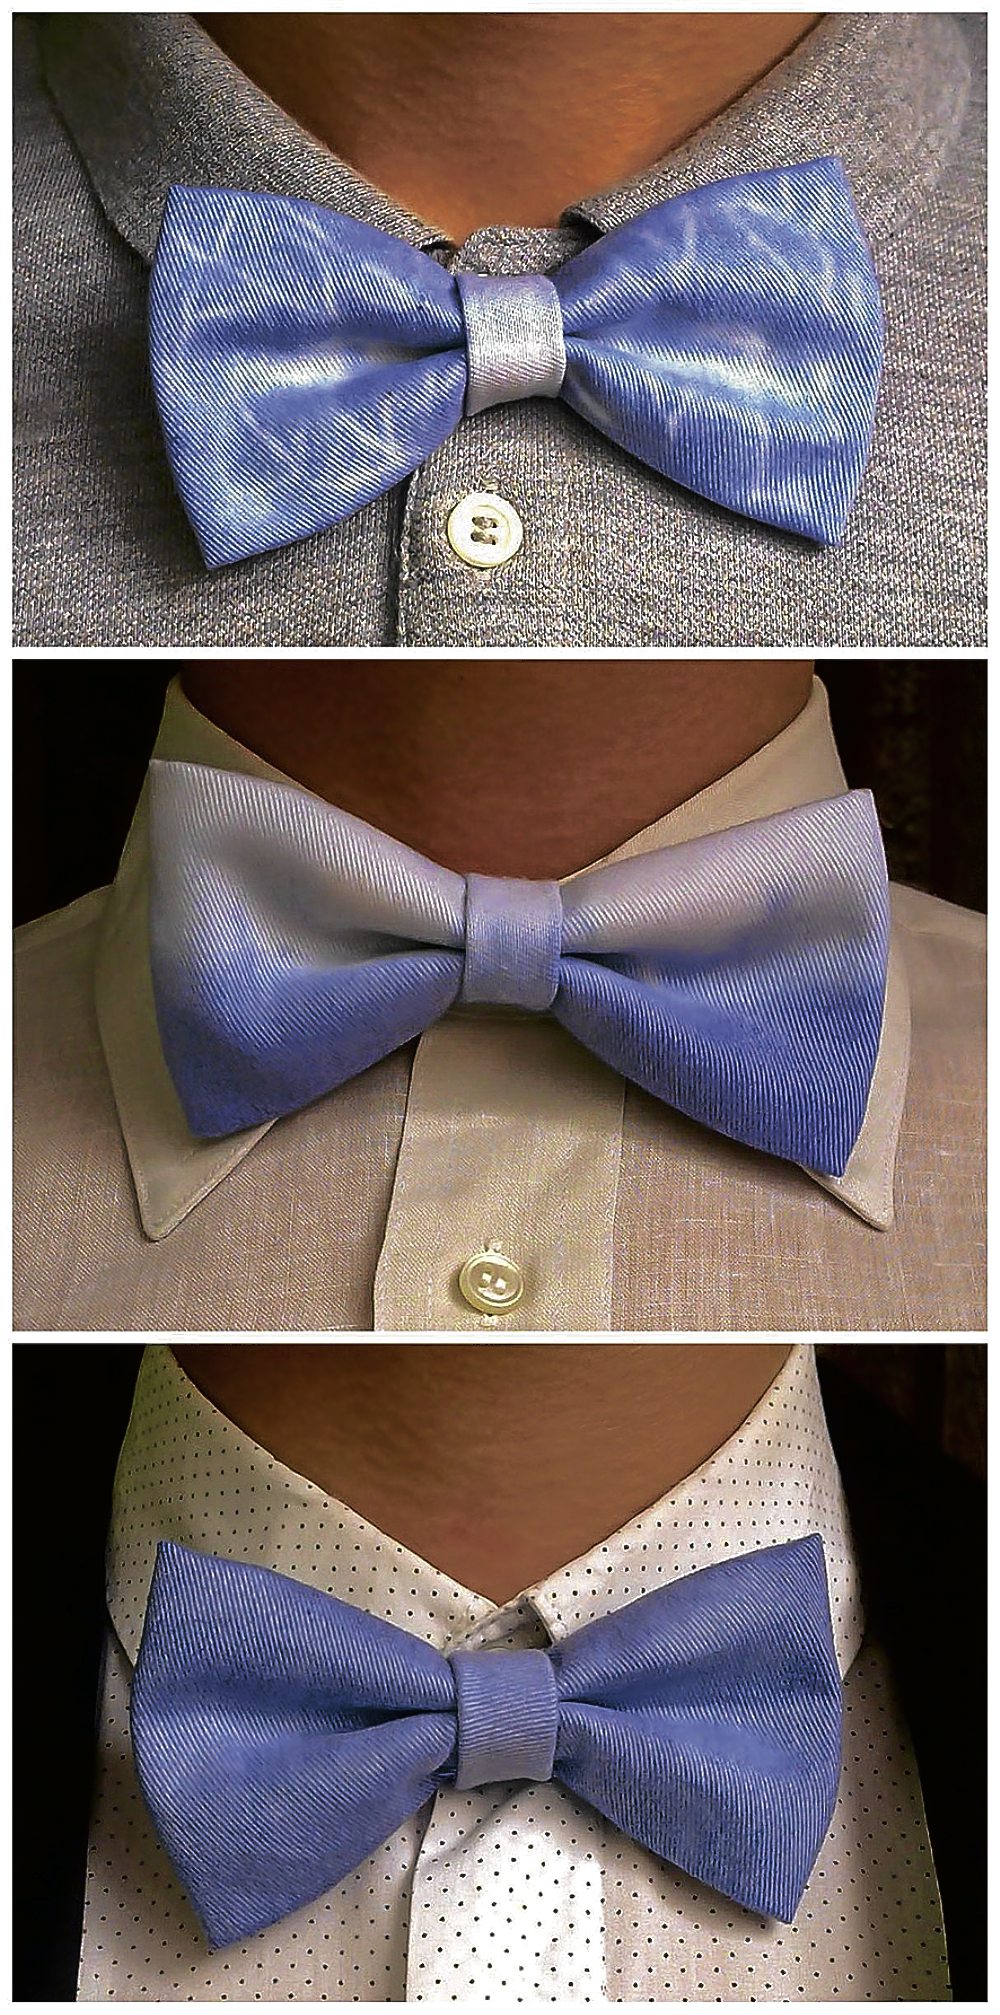 Dye hard: Bow-tie with a vengeance | Lifestyle.INQ